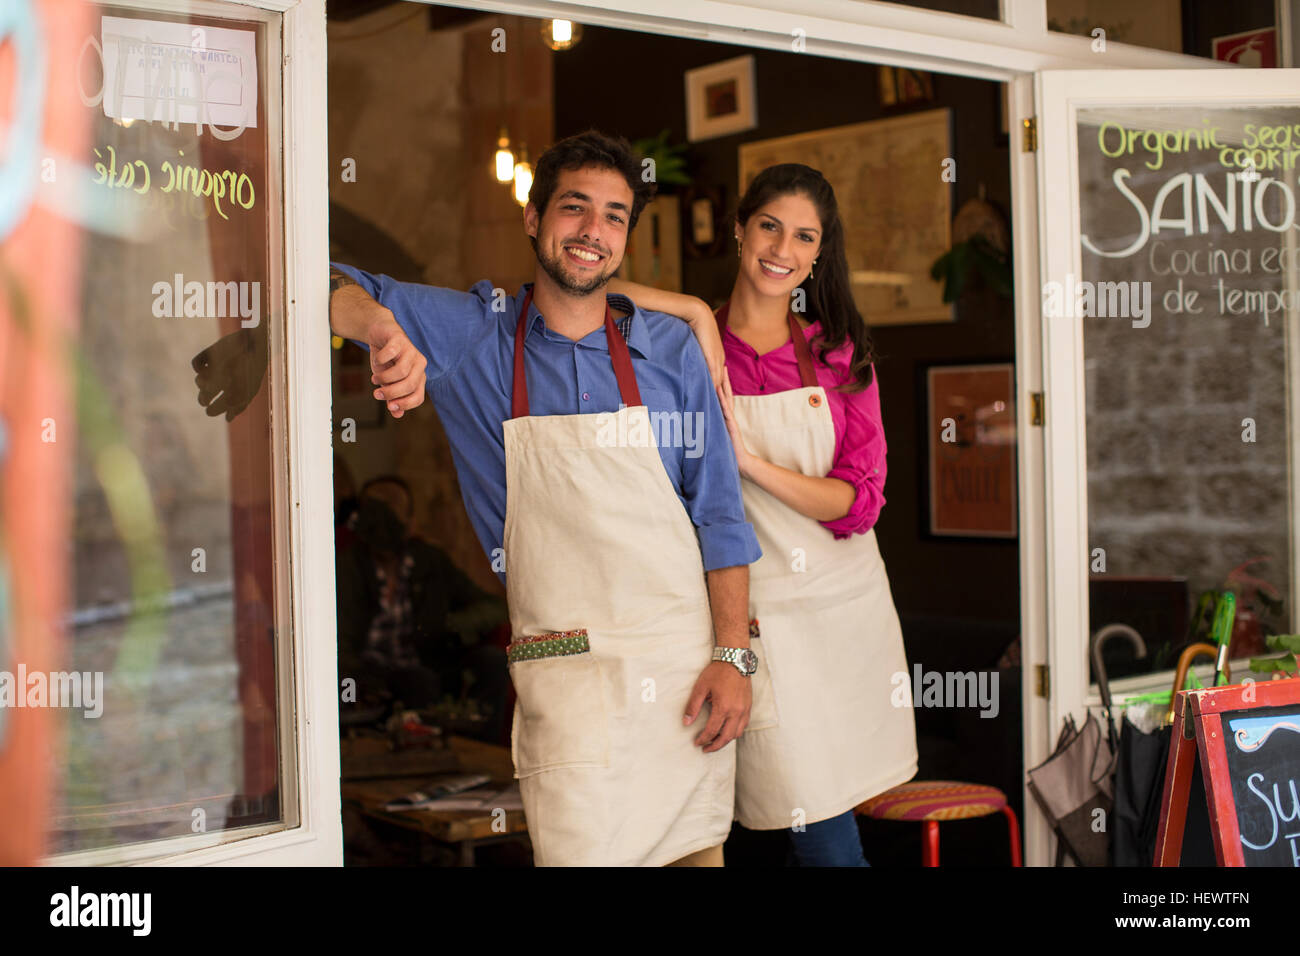 Restaurant owners standing at entrance of cafe, Palma de Mallorca, Spain Stock Photo